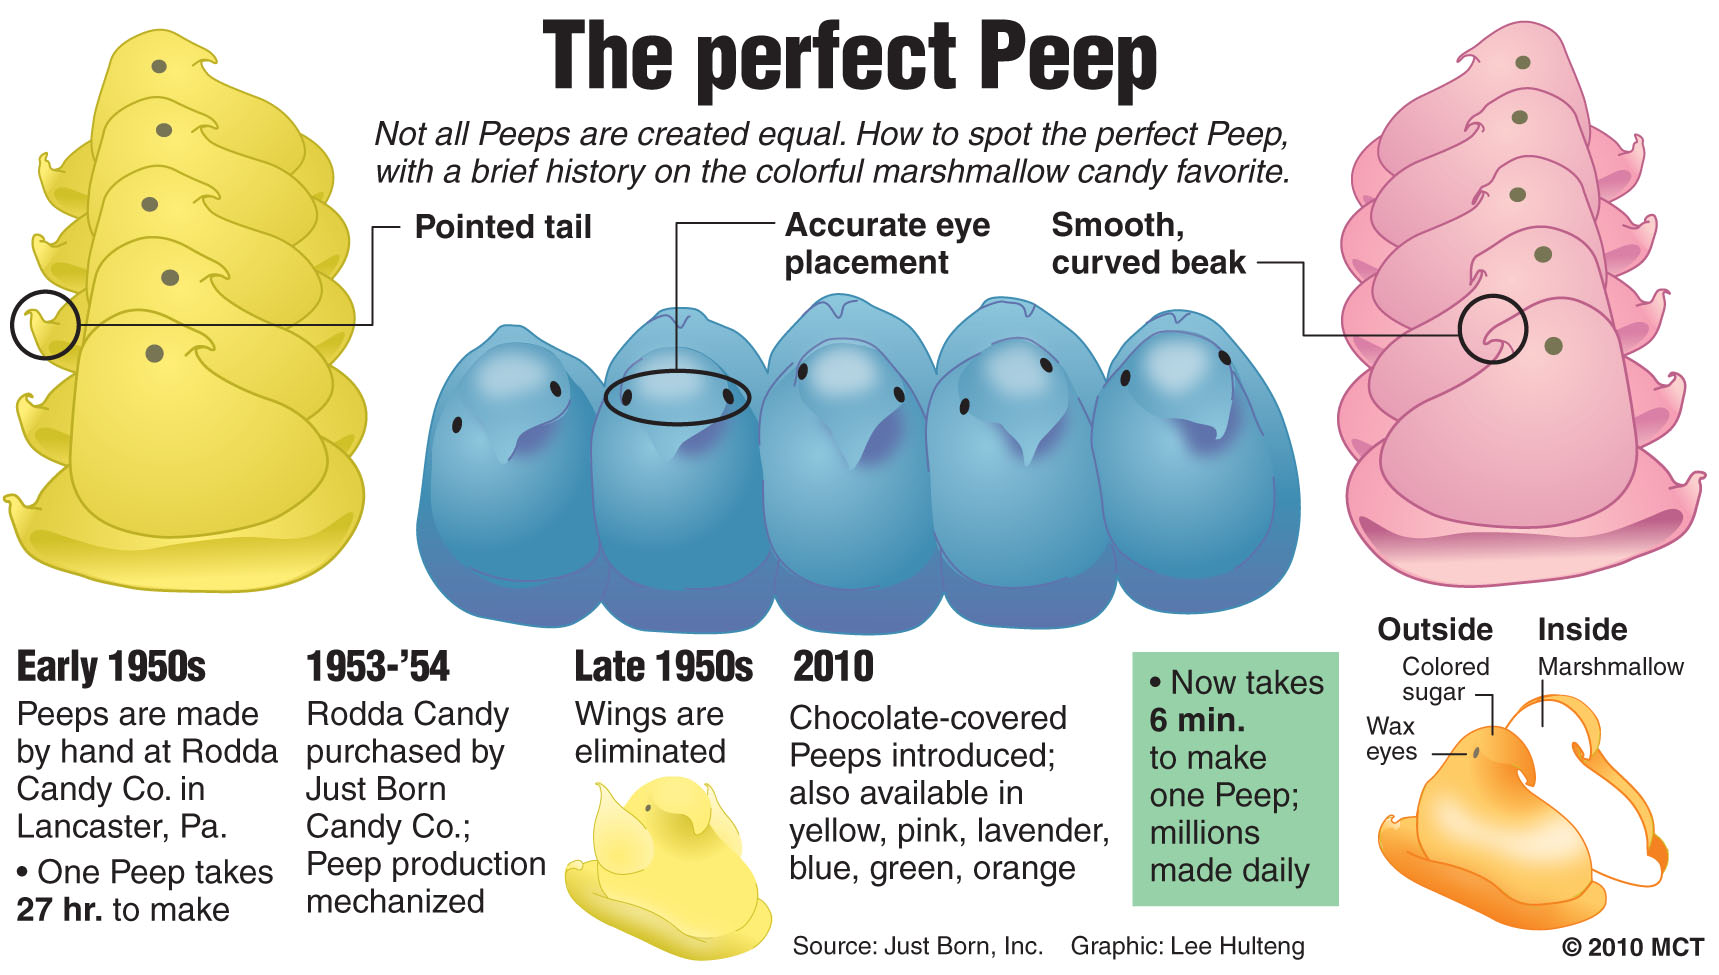 In case you're wondering if you have received peep perfection, here ya go